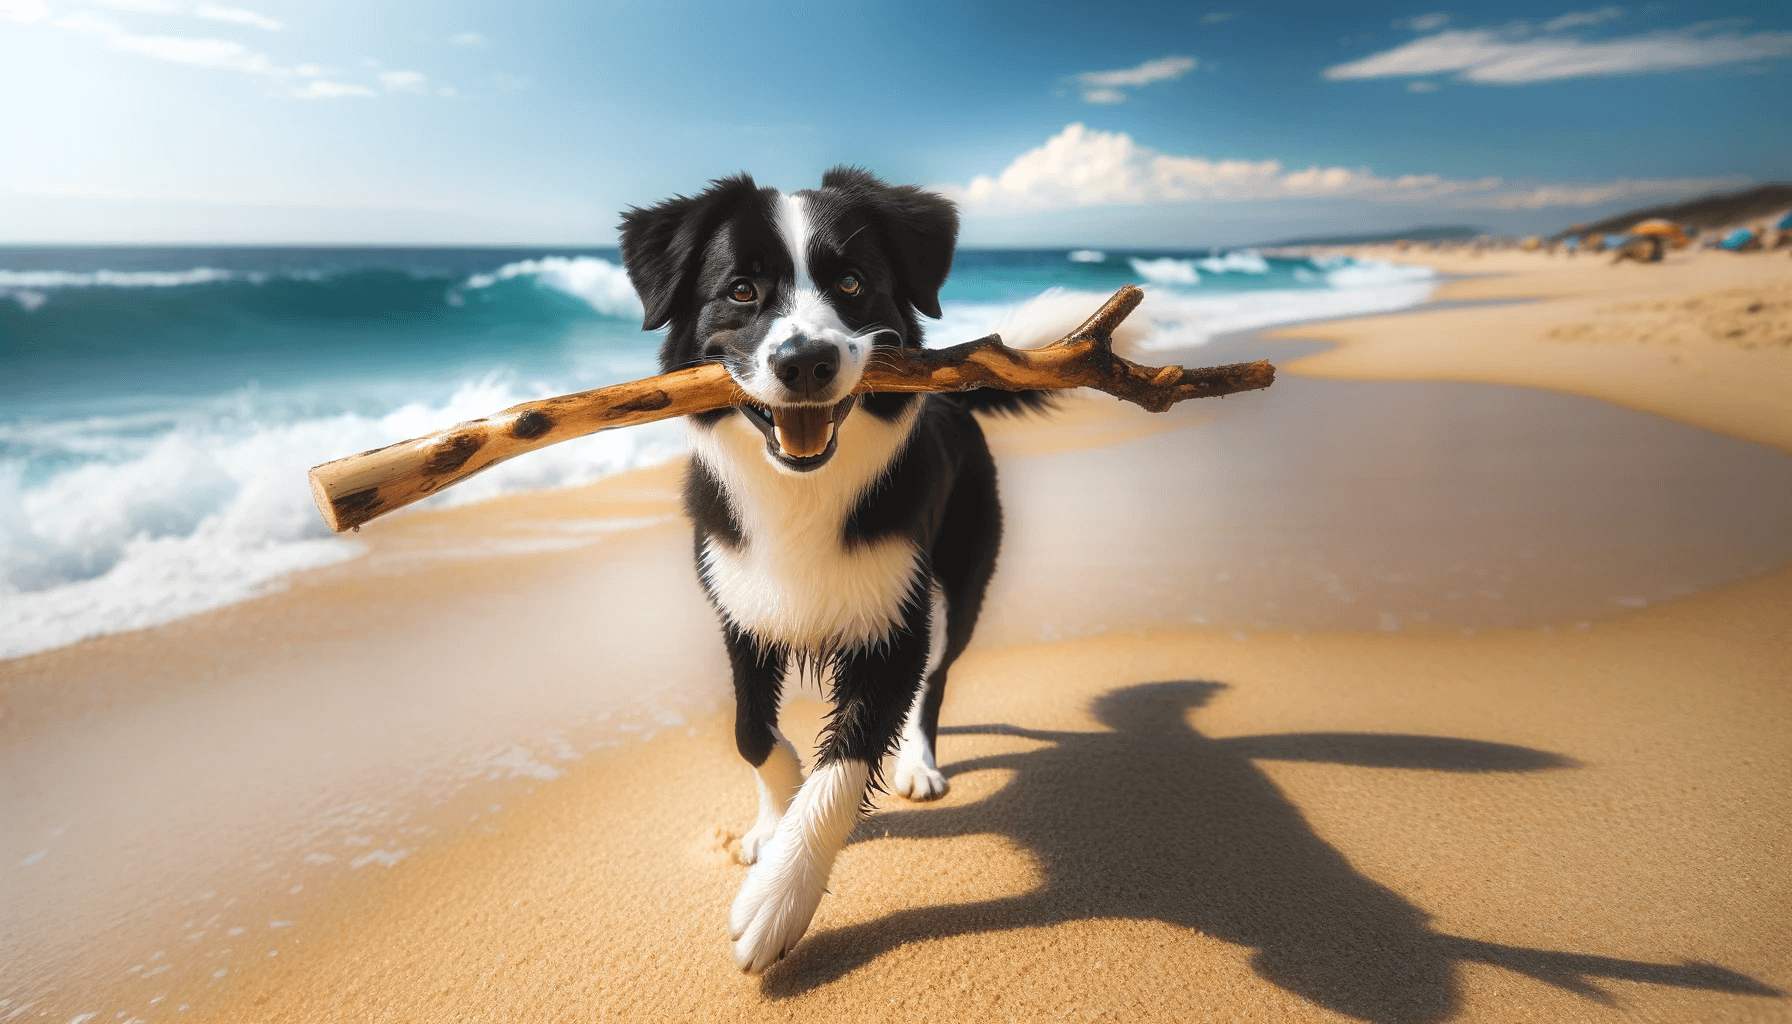 Playful Borador Border Collie Lab Mix with a black and white coat carrying a stick in its mouth on a sandy beach.